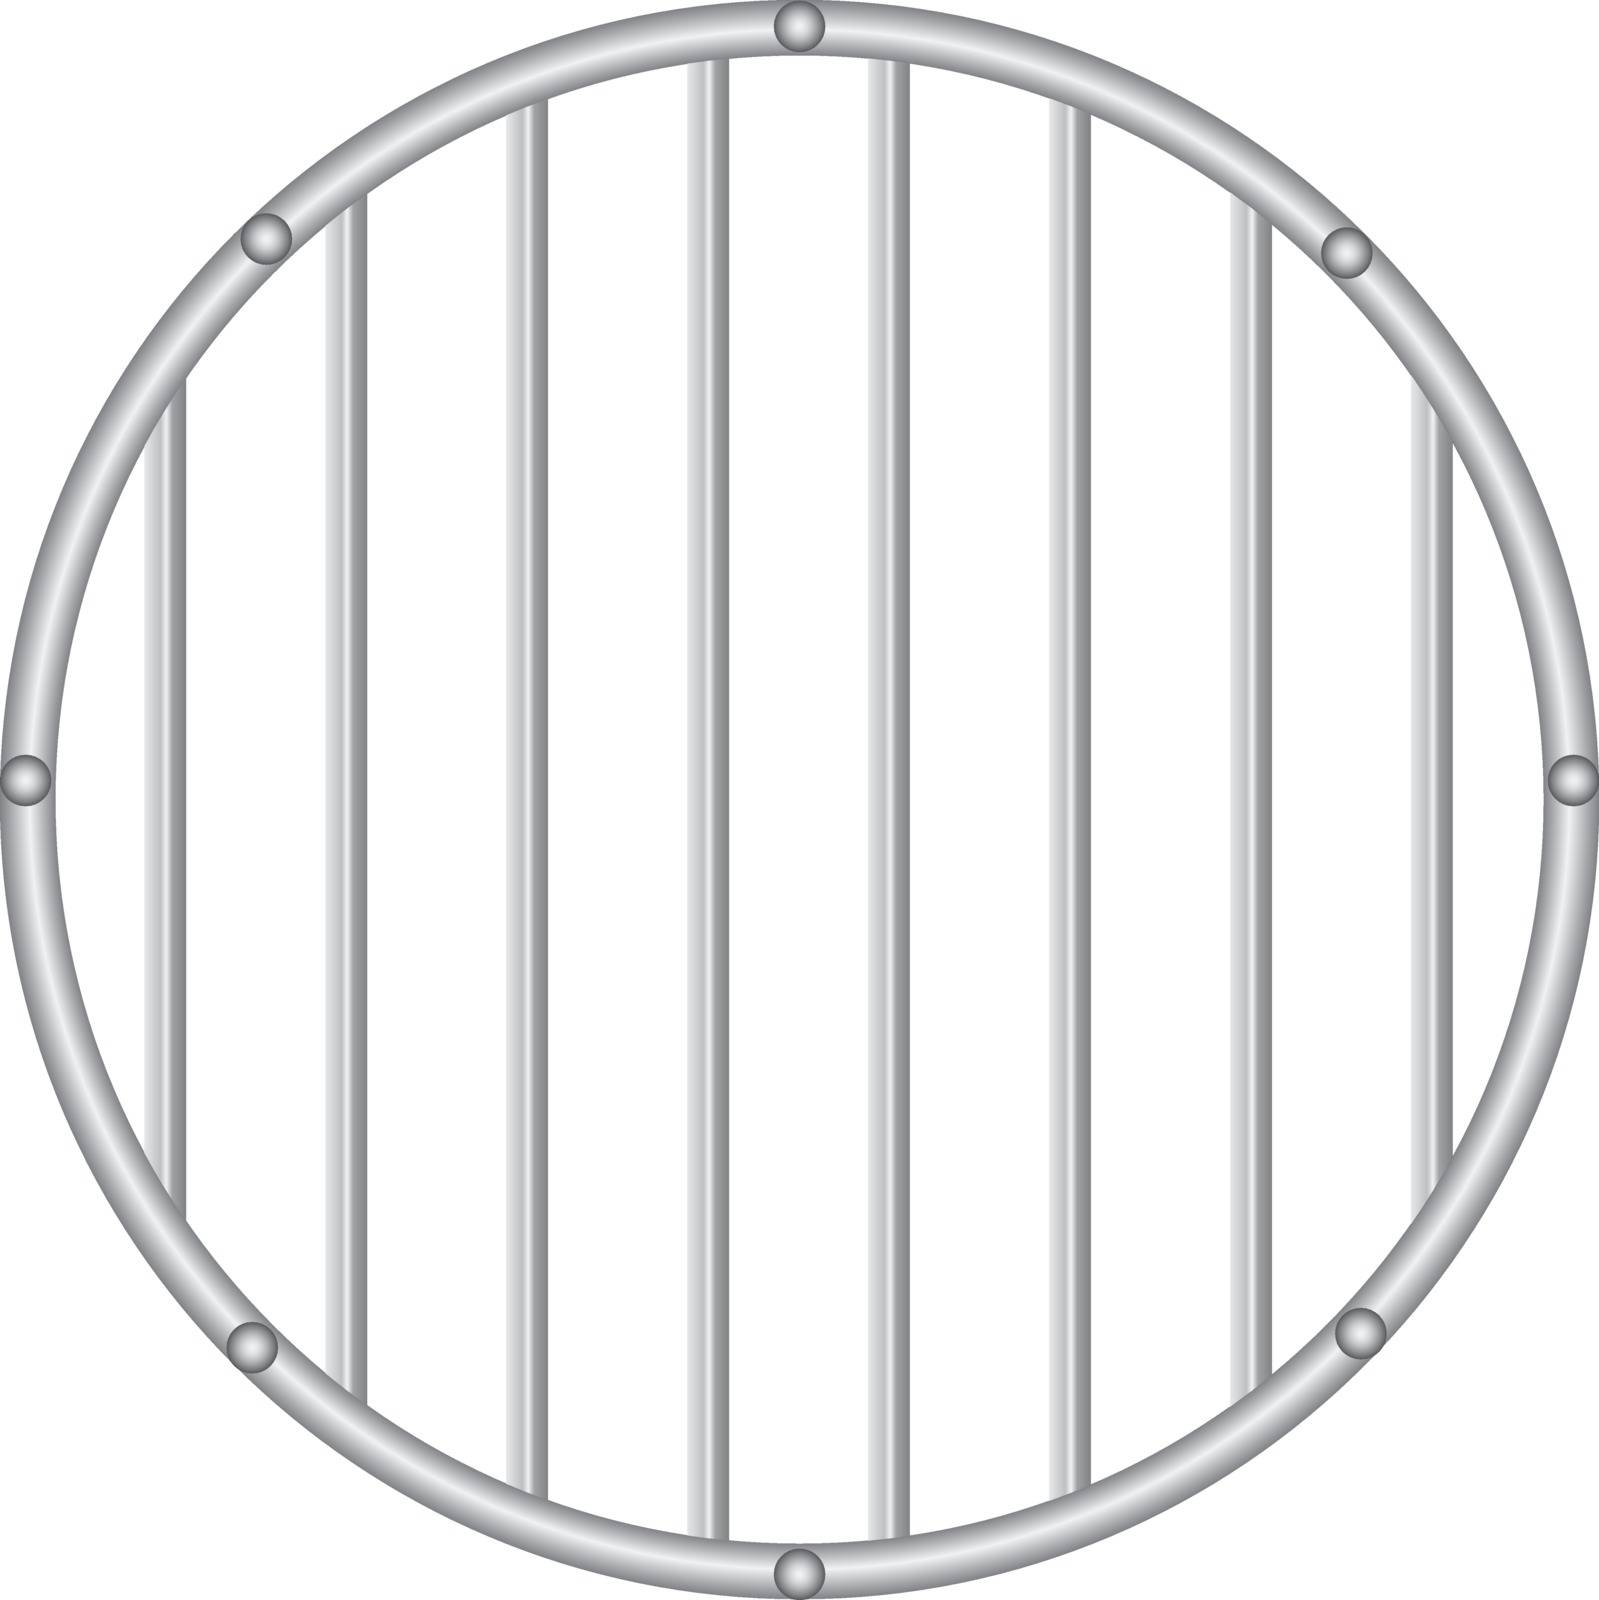 Industrial round grille with vertical rods. Vector illustration.